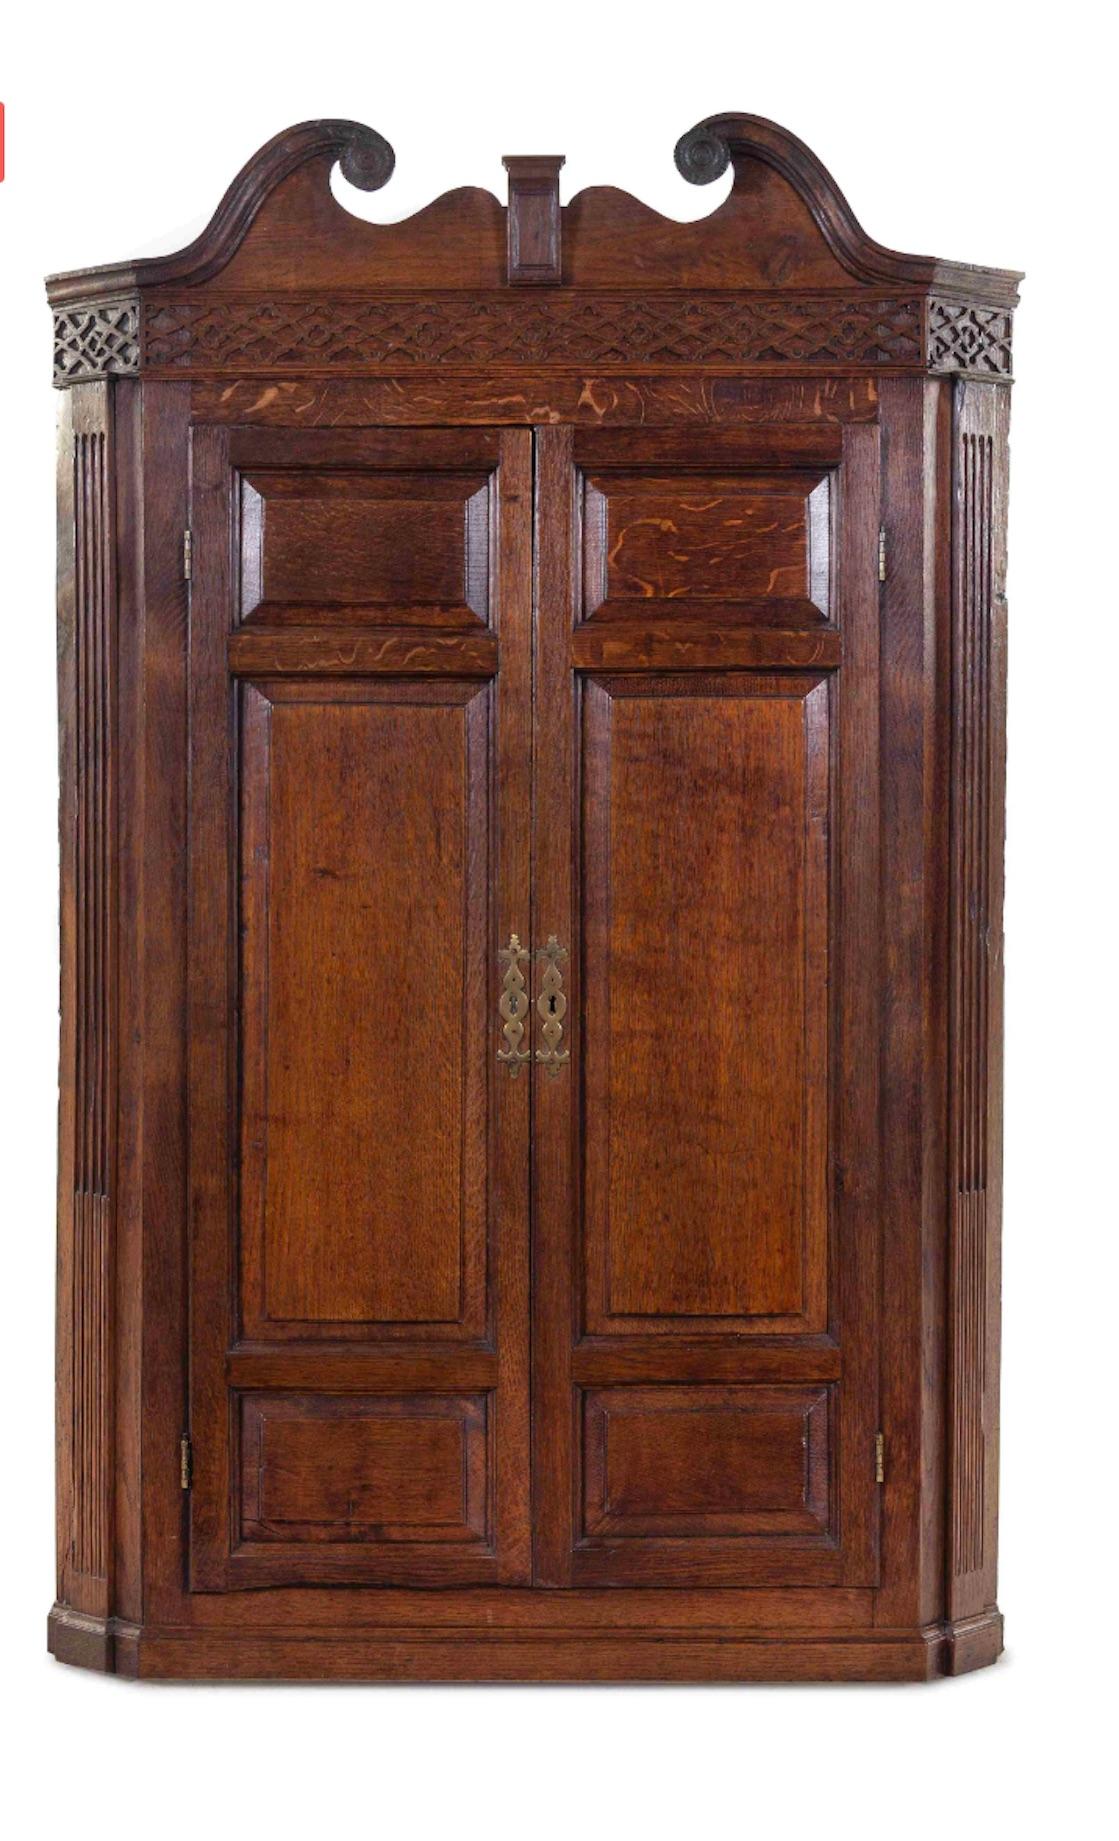 George III Oak Hanging Corner Cabinet, Great Scale, Color and Proportions In Excellent Condition For Sale In Buchanan, MI